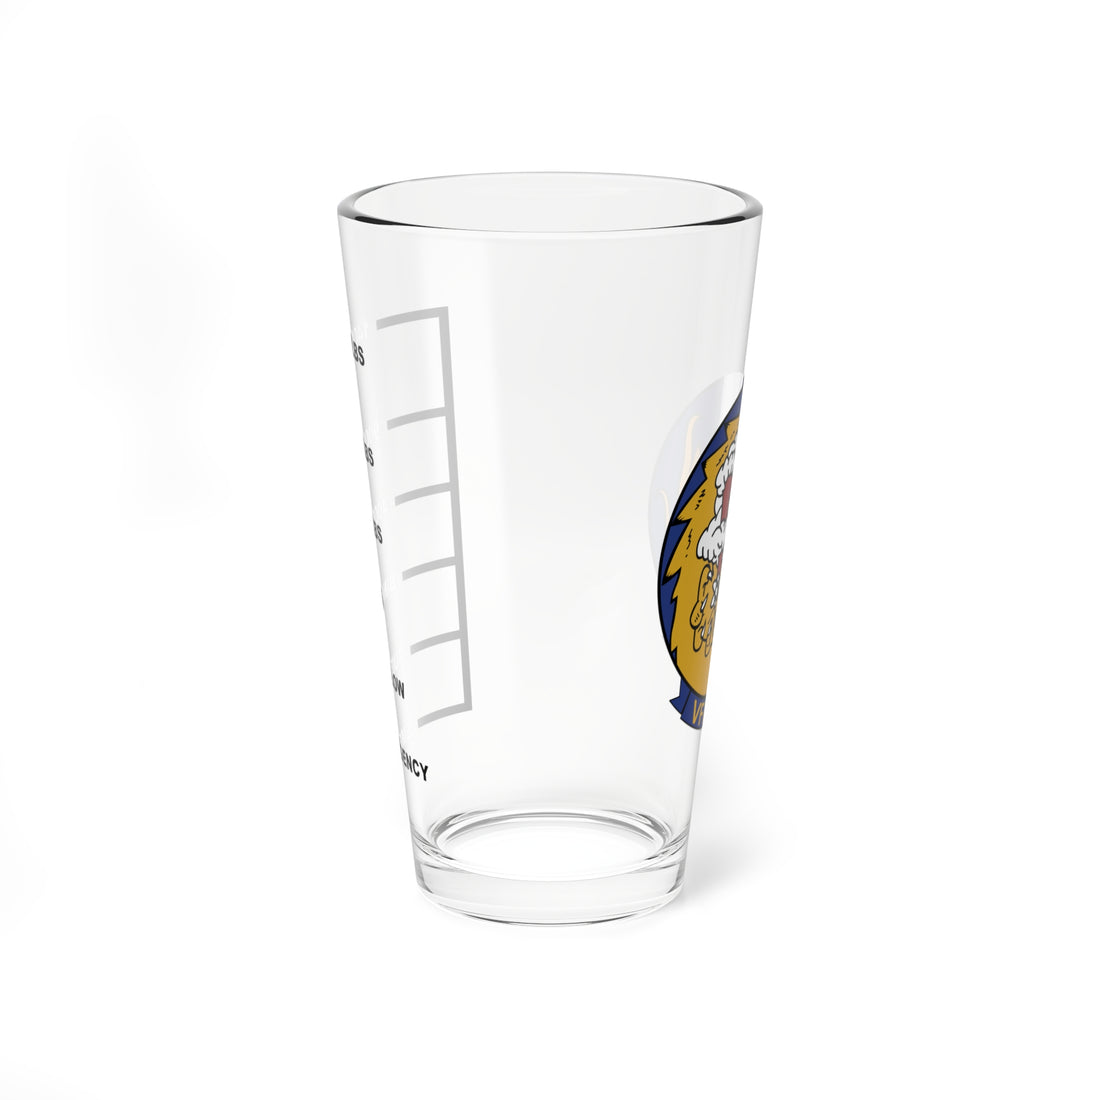 VFA-192 "Golden Dragons" Fuel Low Pint Glass, Navy Strike Fighter Squadron flying the F/A-18 Hornet